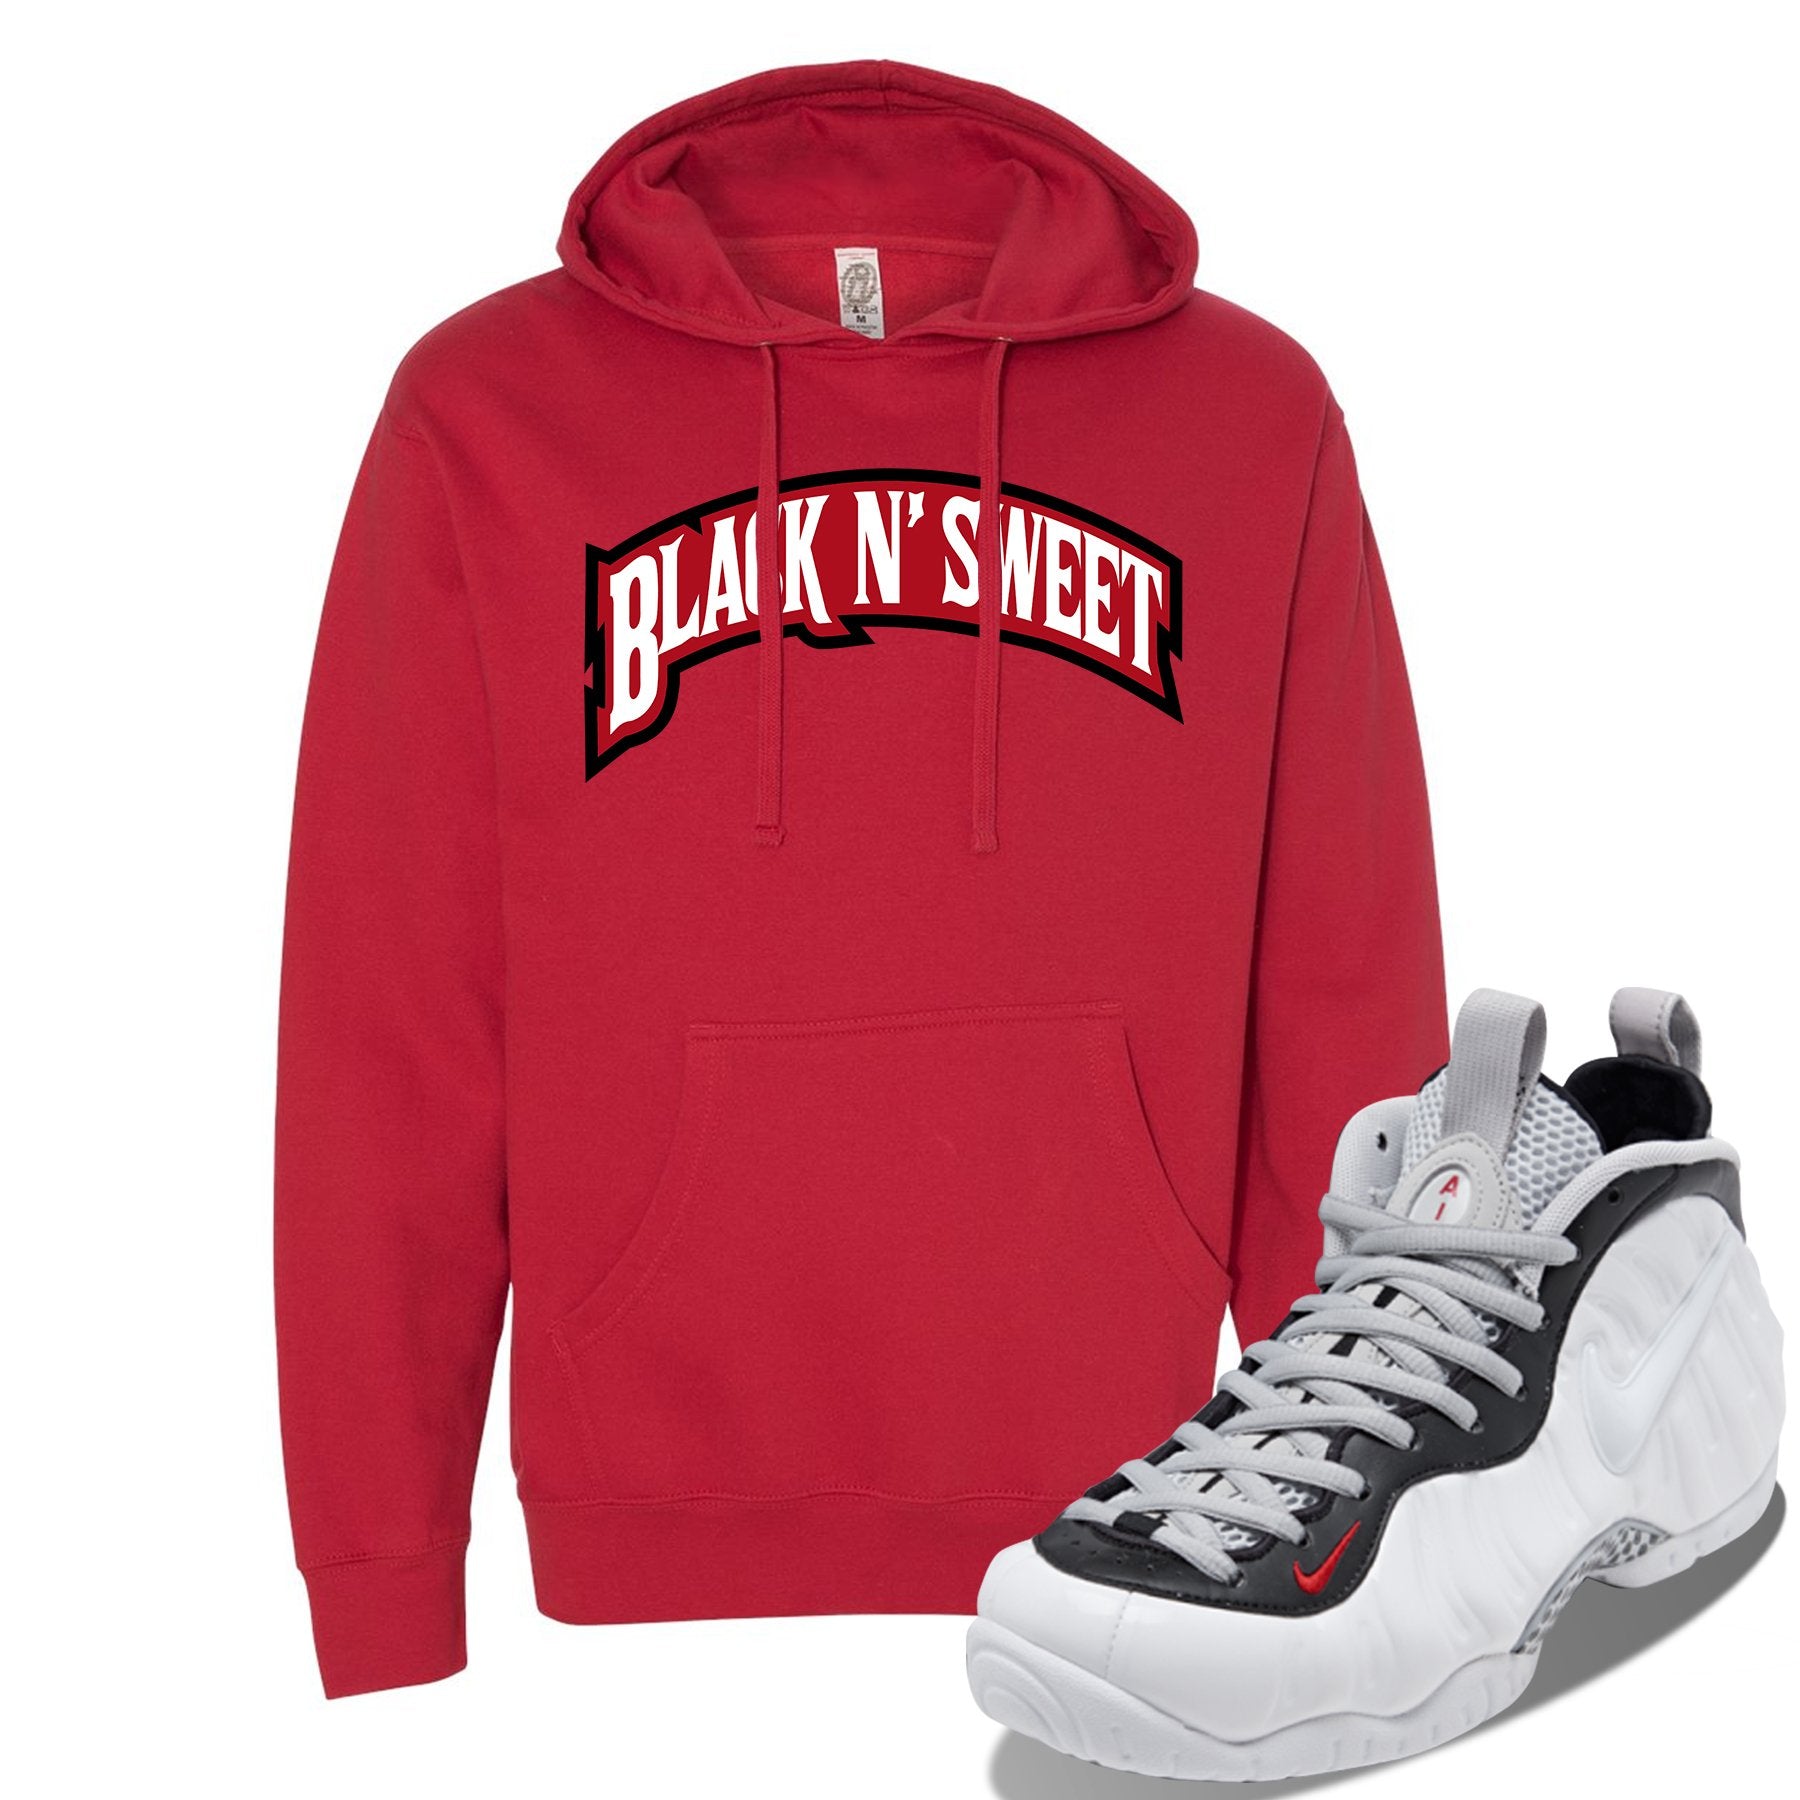 Foamposite Pro White Black University Red Sneaker Red Pullover Hoodie | Hoodie to match Nike Air Foamposite Pro White Black University Red Shoes | Black N Sweet Arch